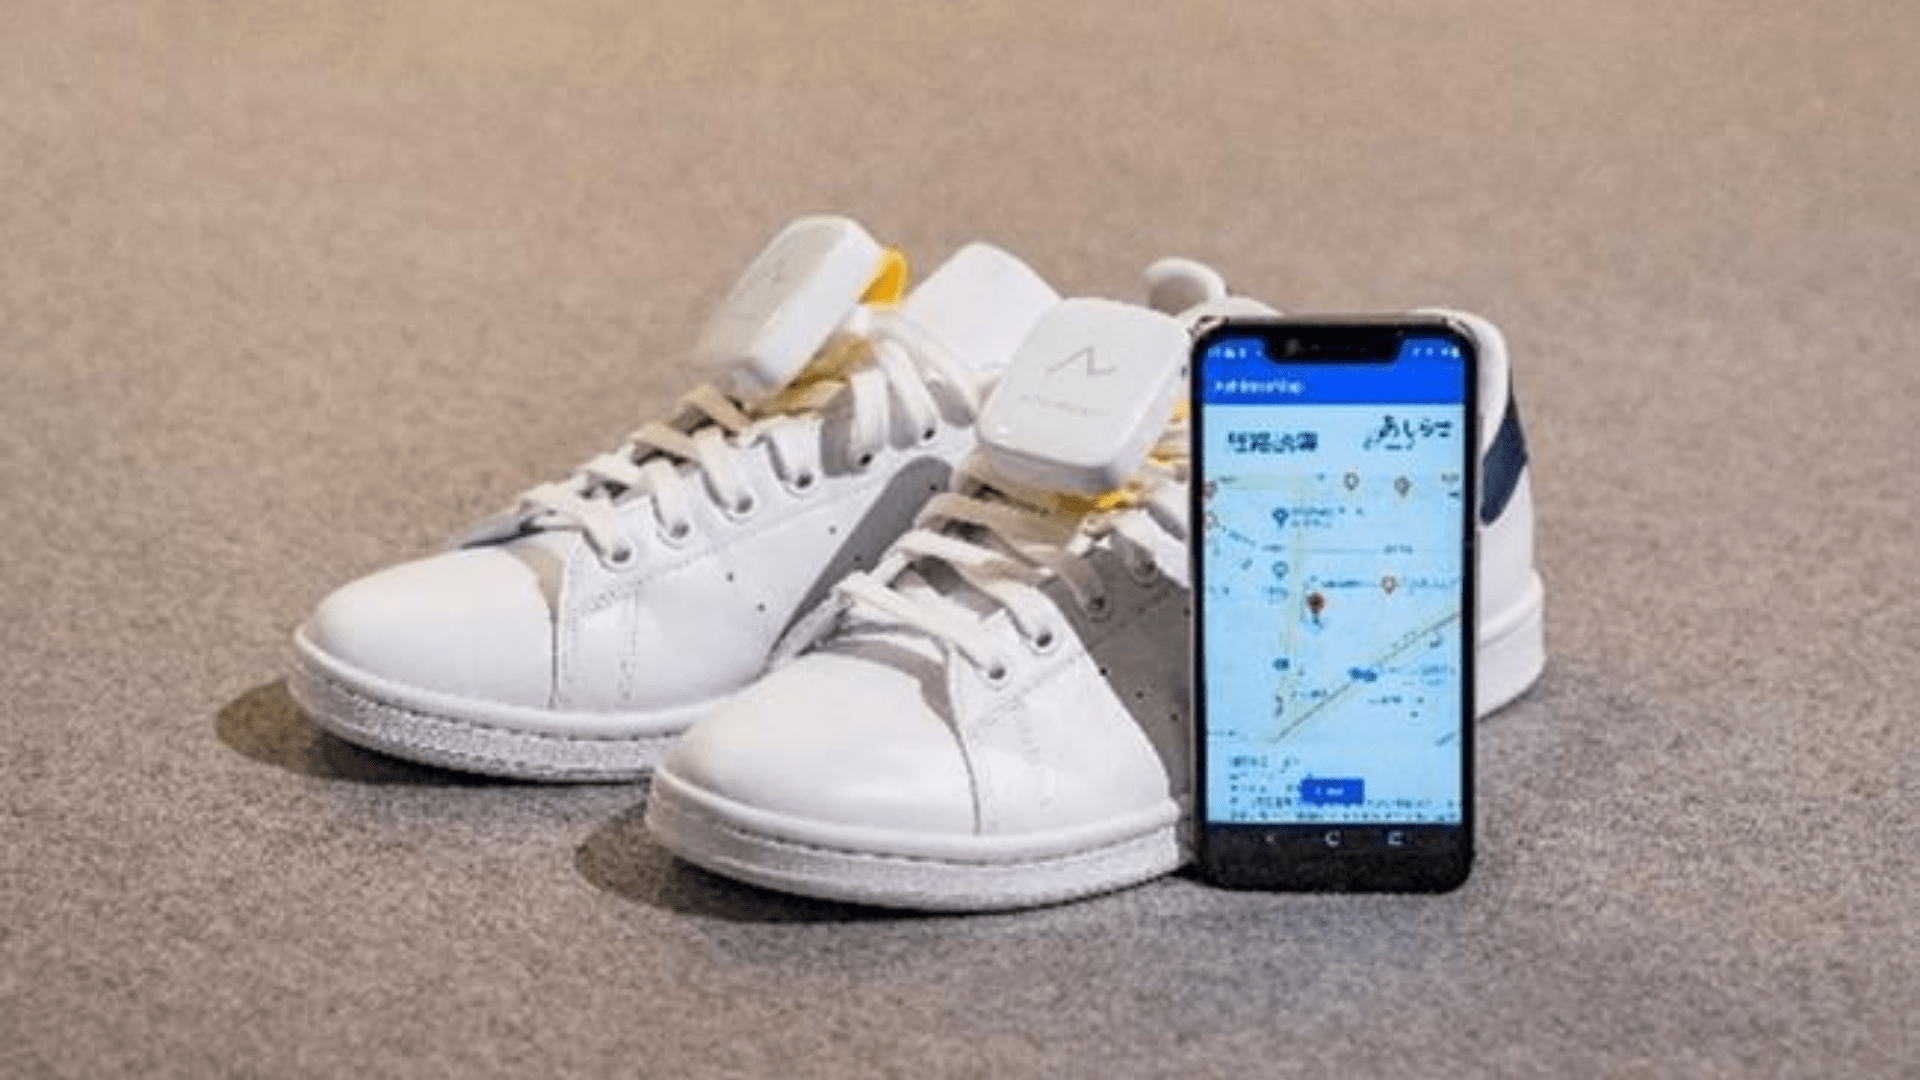 Honda creates GPS navigation system for your shoes